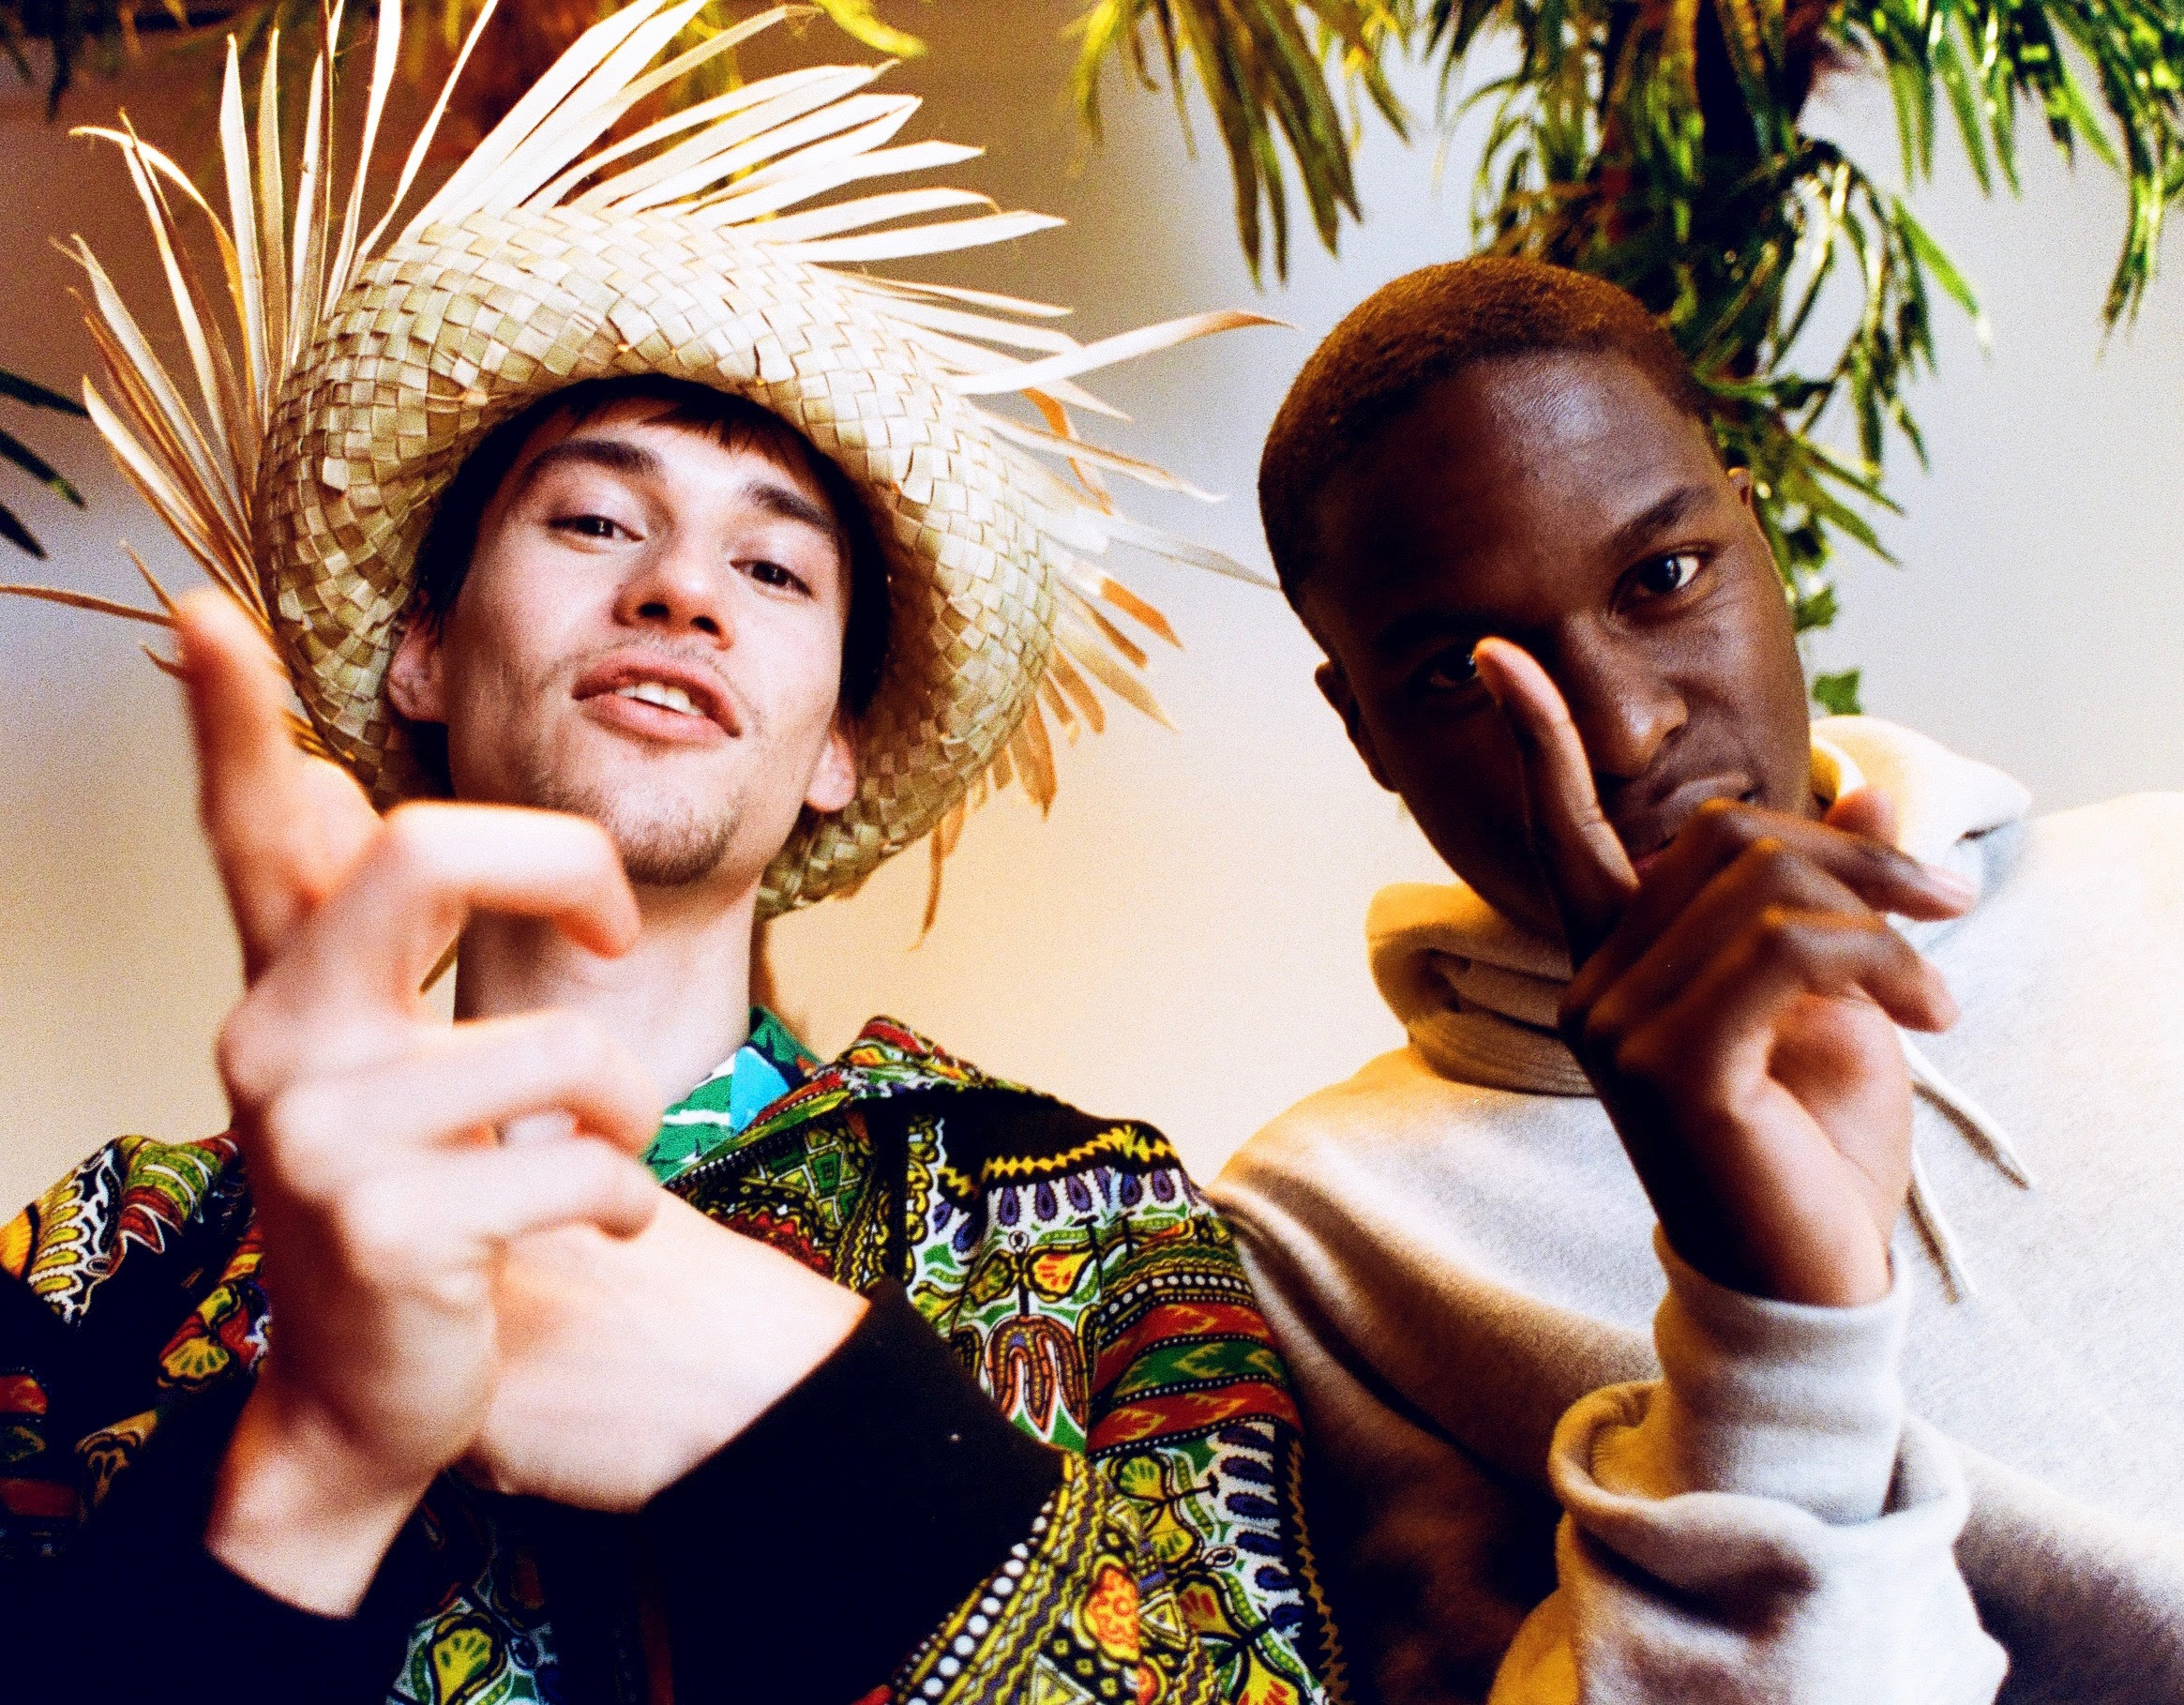 Producer, songwriter, instrumentalist, and poly-octave vocalist Jacob Collier has shared "Time Alone With You," featuring Daniel Caesar. The new single